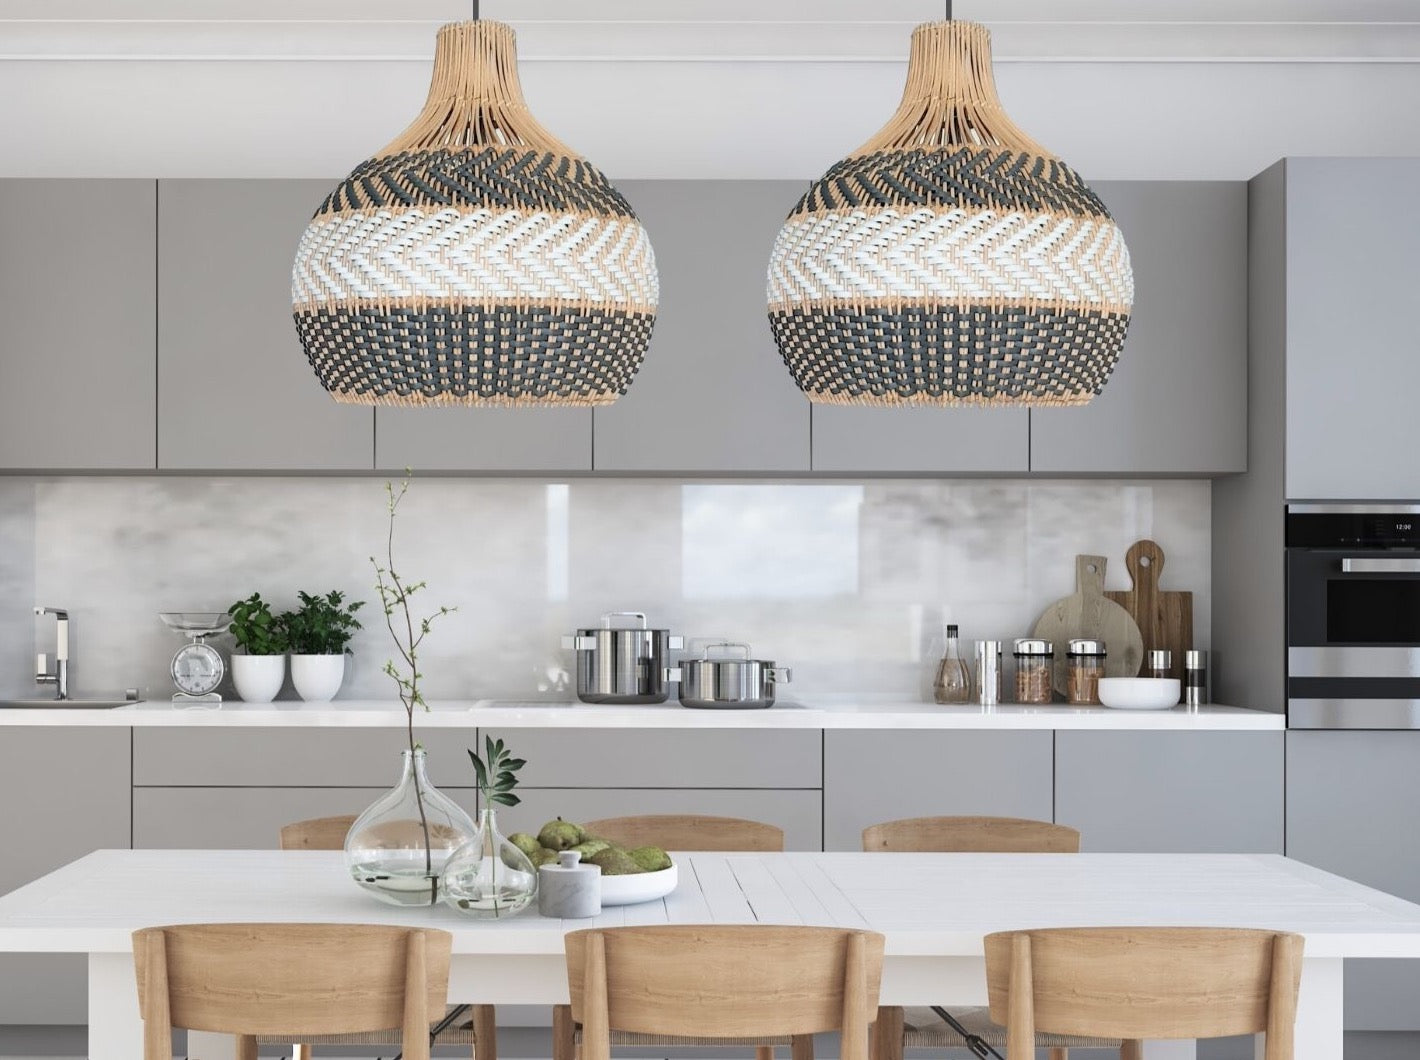 Serena Grey rattan pendant light. Anyone in need of some home jewelry? Then this dark grey rattan pendant light is a match! With ultimate gray of Pantone 2021 in mind, I designed this with a little bit darker with the same tone. The natural rattan will still maintain the neutral theme of the interior design. Visit shopmybaliliving.com for more rattan seagrass light.